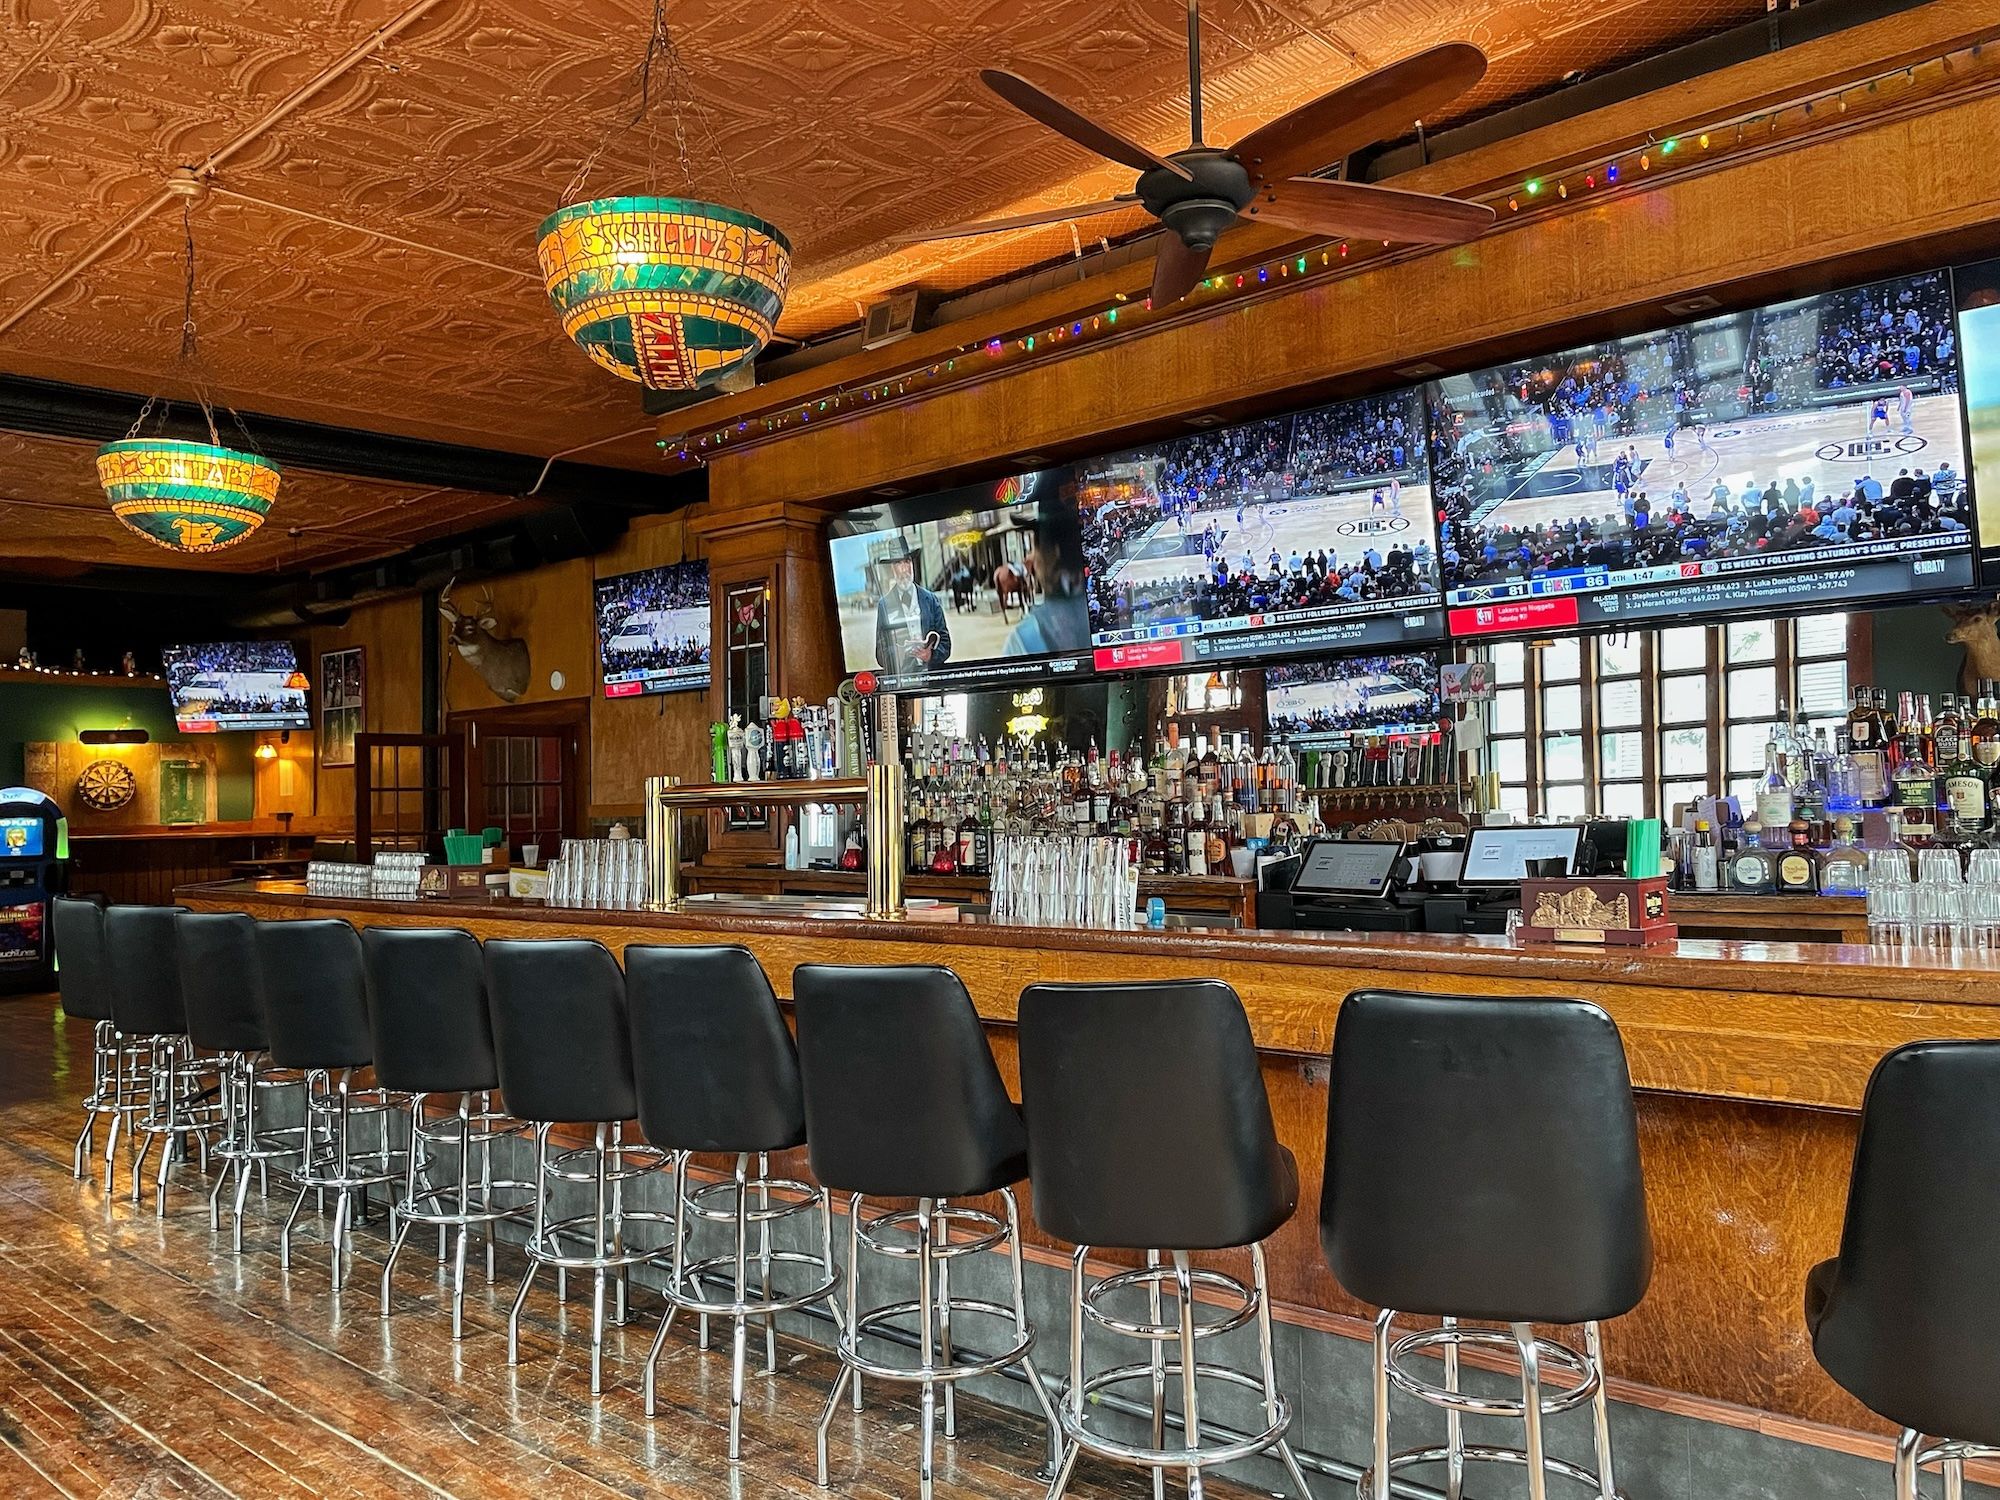 Long bar with TVs above and row of black stools.